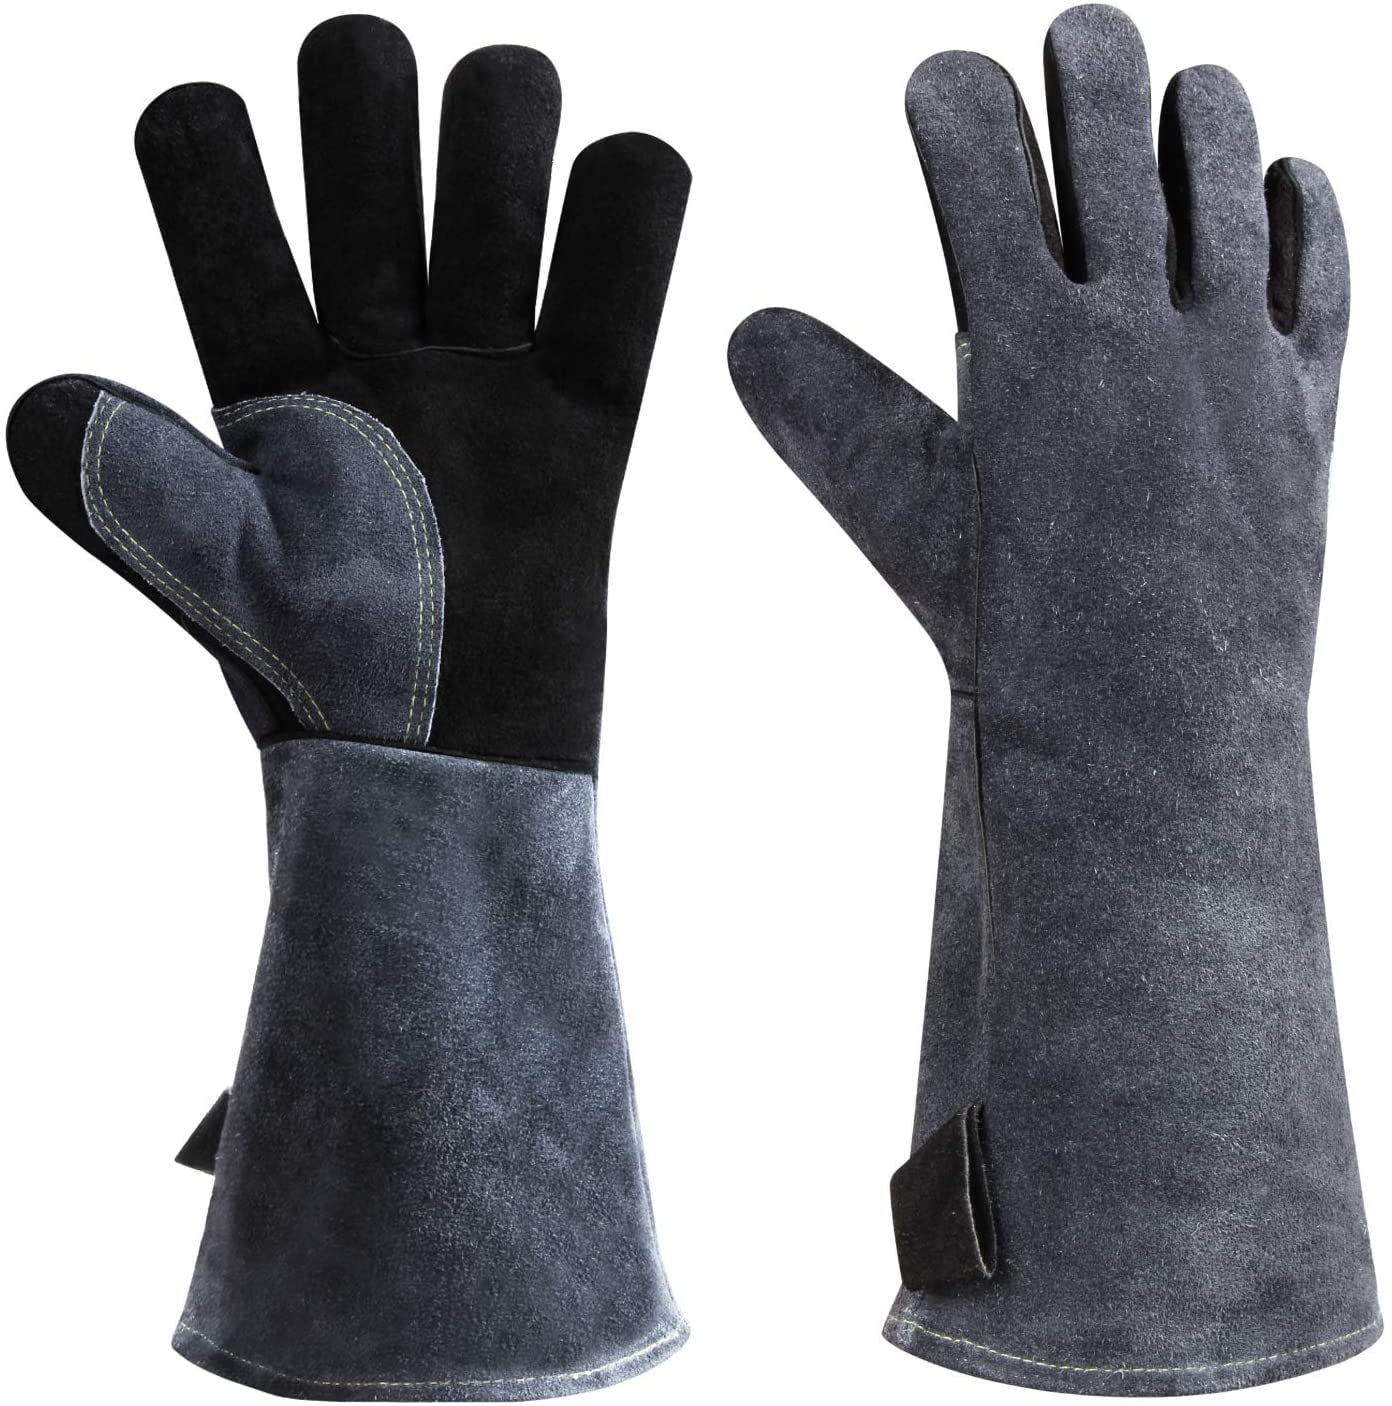 Heat Resistant Fire Protection Gloves for Grill Cooking Wood Stove Oven and BBQ